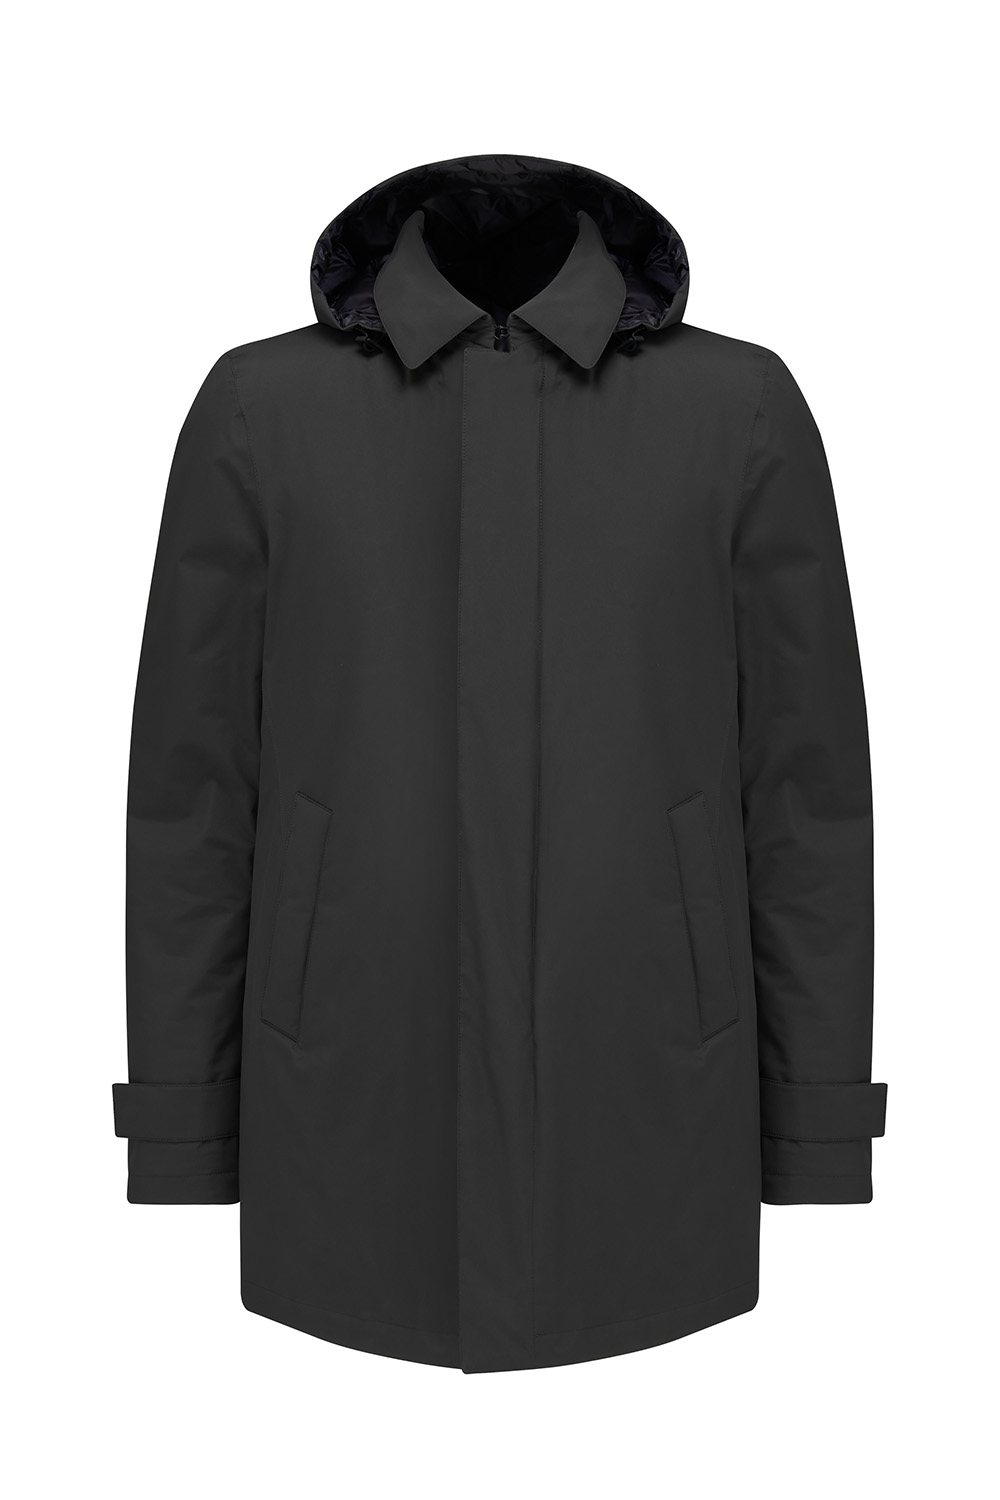 Herno Laminar Men’s Gore-Tex Double Layer Down Coat Grey - New W21  Collection